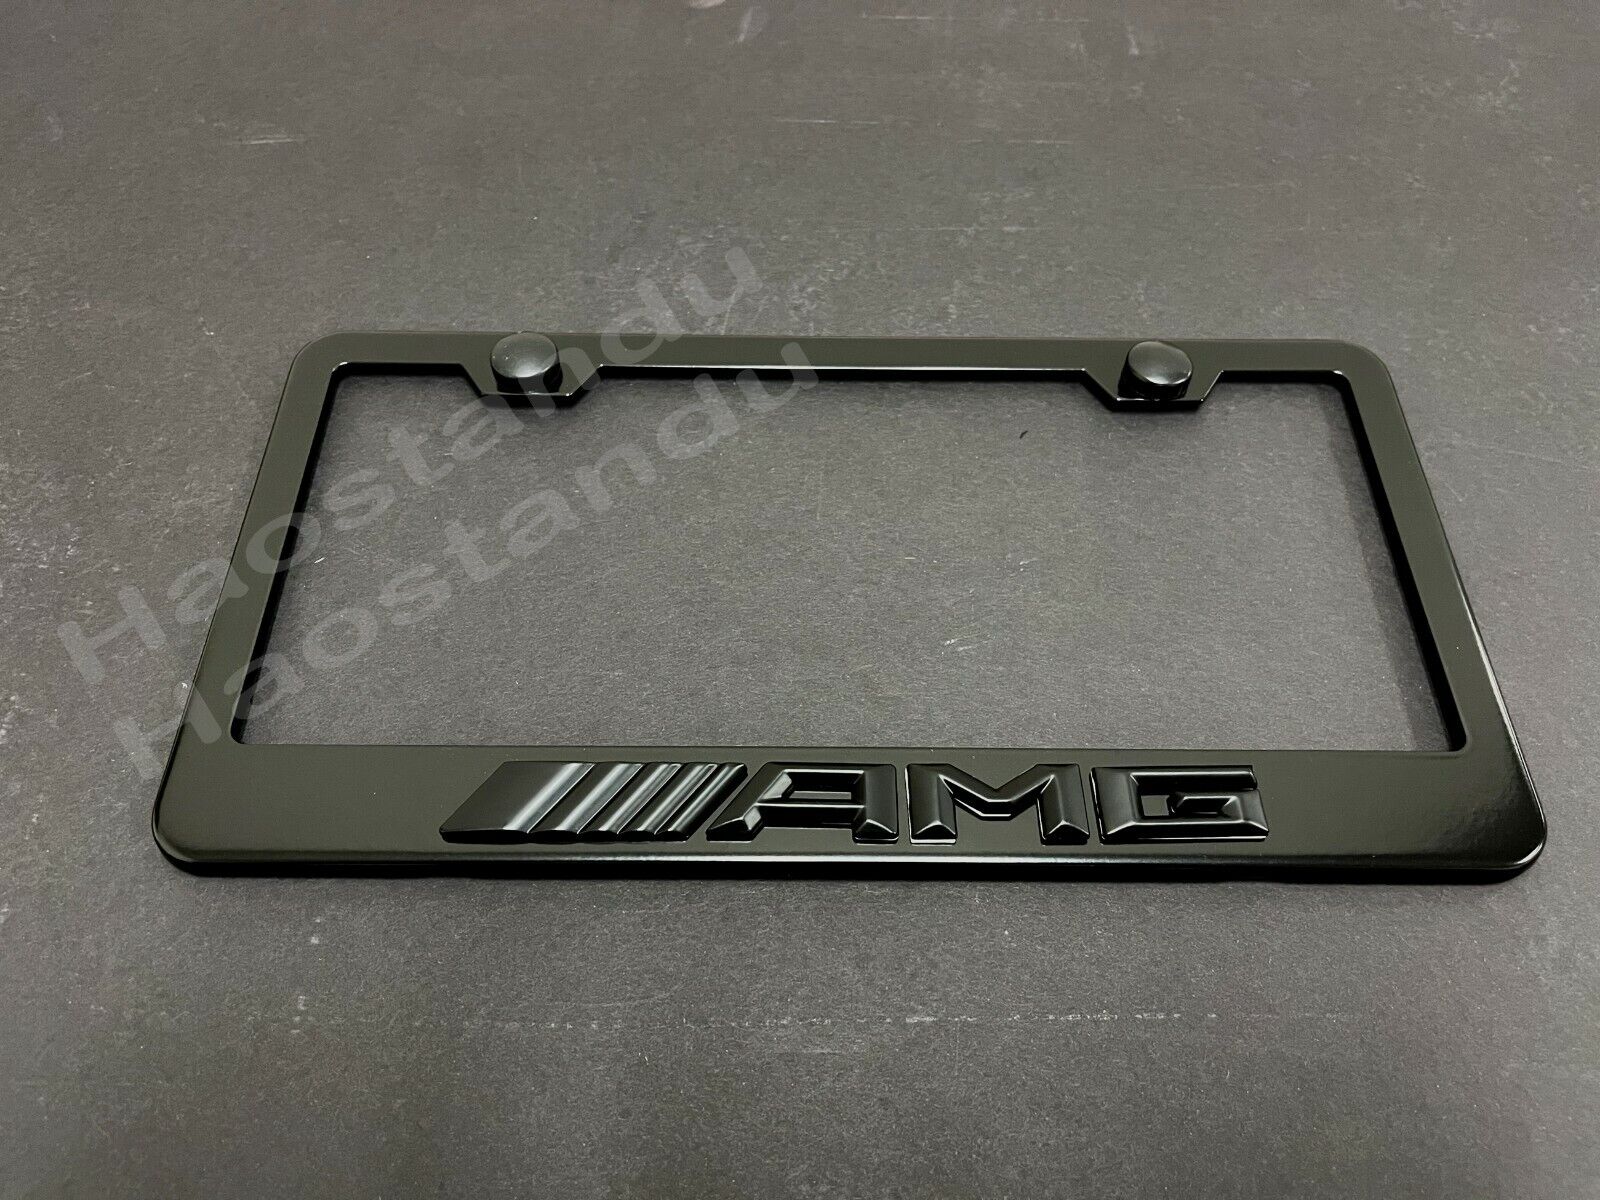 1x *BlackAMG* 3D Emblem BLACK Stainless License Plate Frame RUST FREE+S.caps New